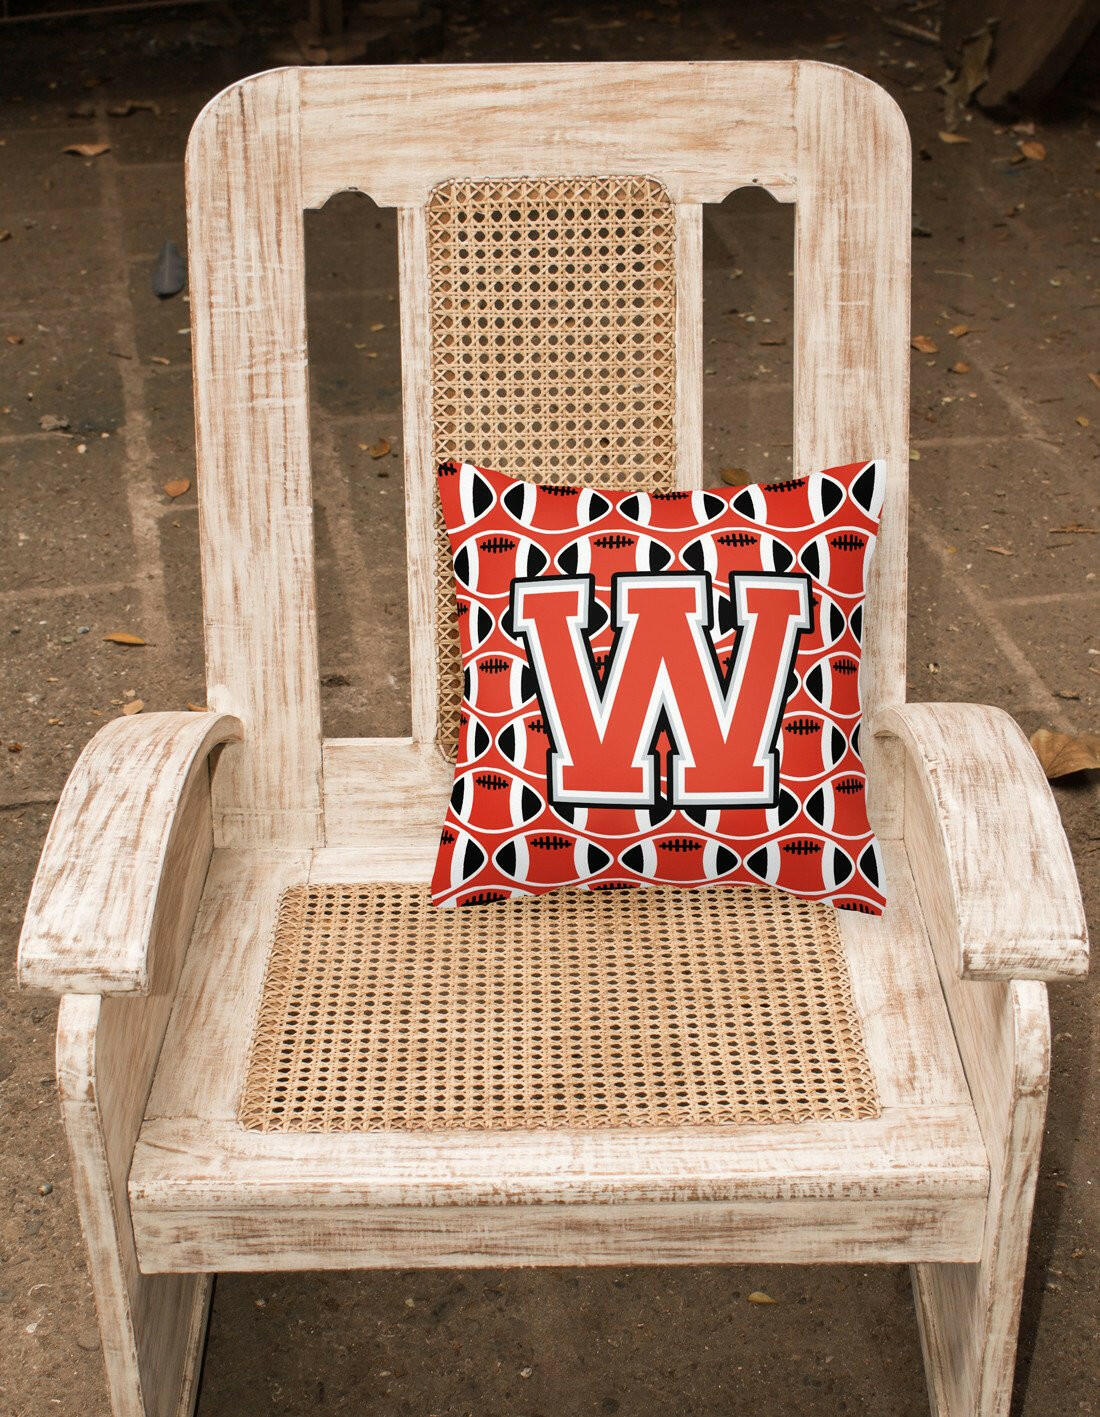 Letter W Football Scarlet and Grey Fabric Decorative Pillow CJ1067-WPW1414 by Caroline's Treasures